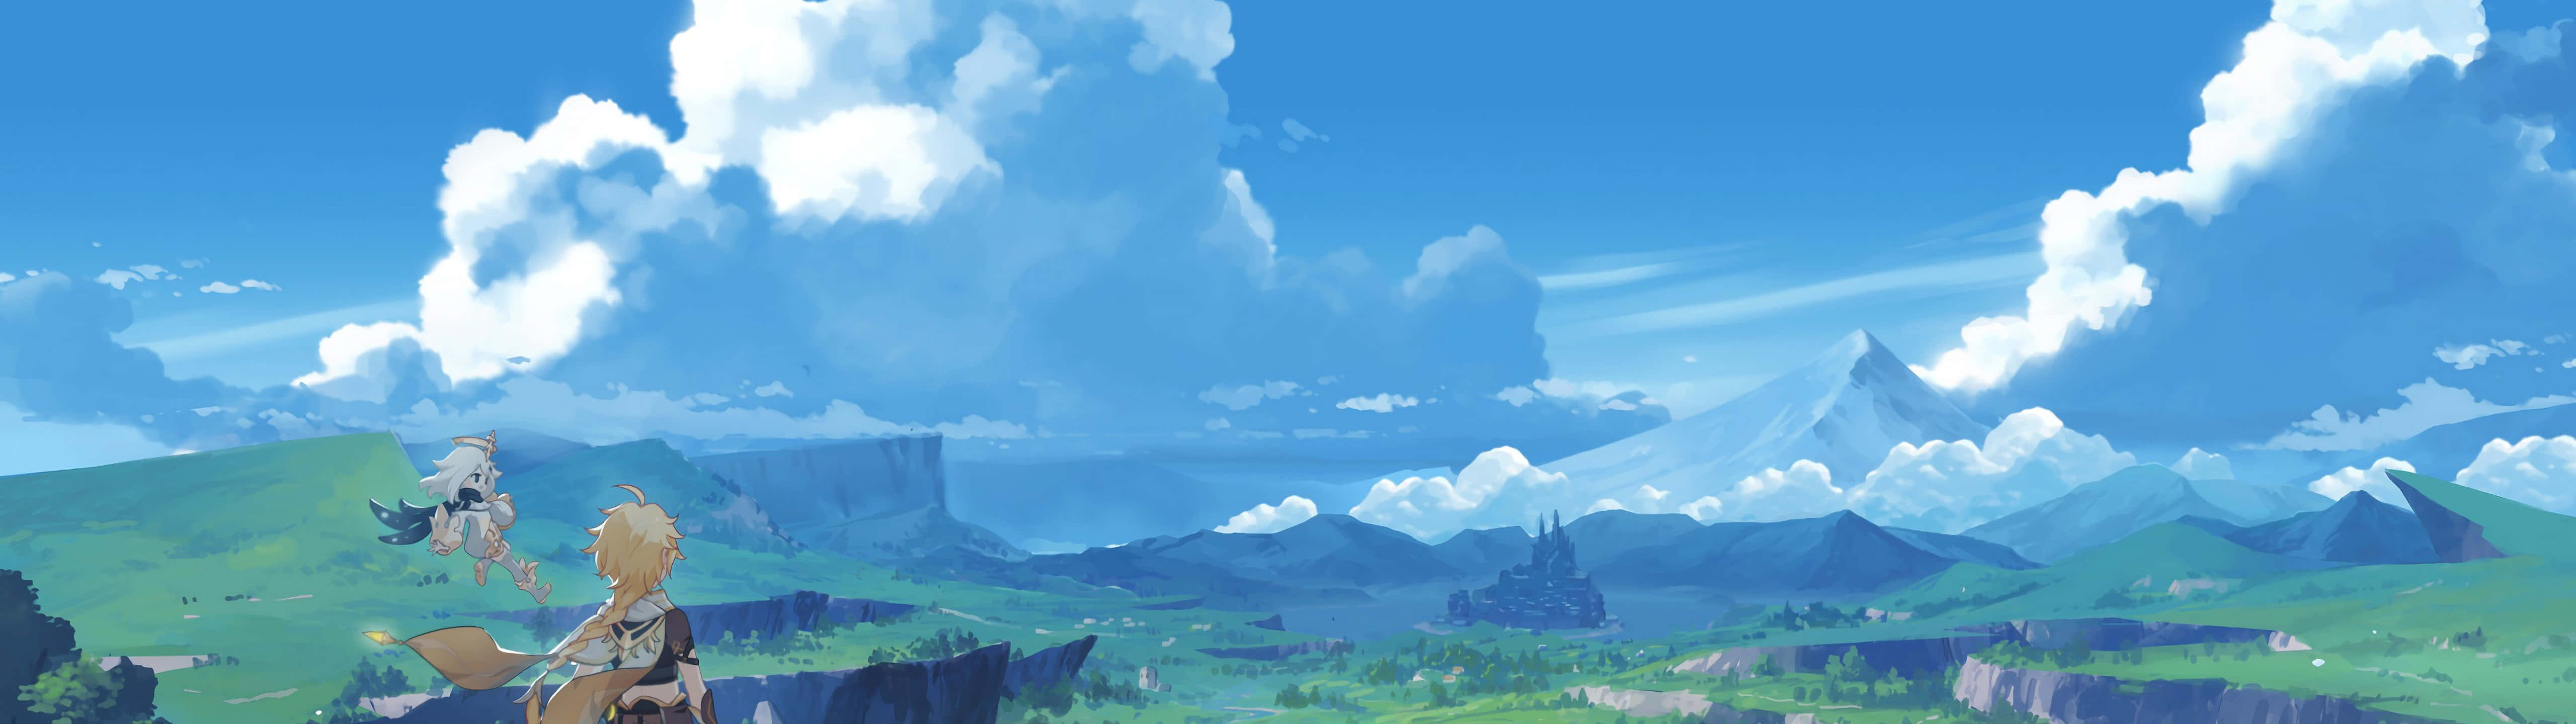 A 2560x1440 wallpaper of Link and his horse, Epona, overlooking a beautiful mountain landscape in The Legend of Zelda: Breath of the Wild. - 5120x1440